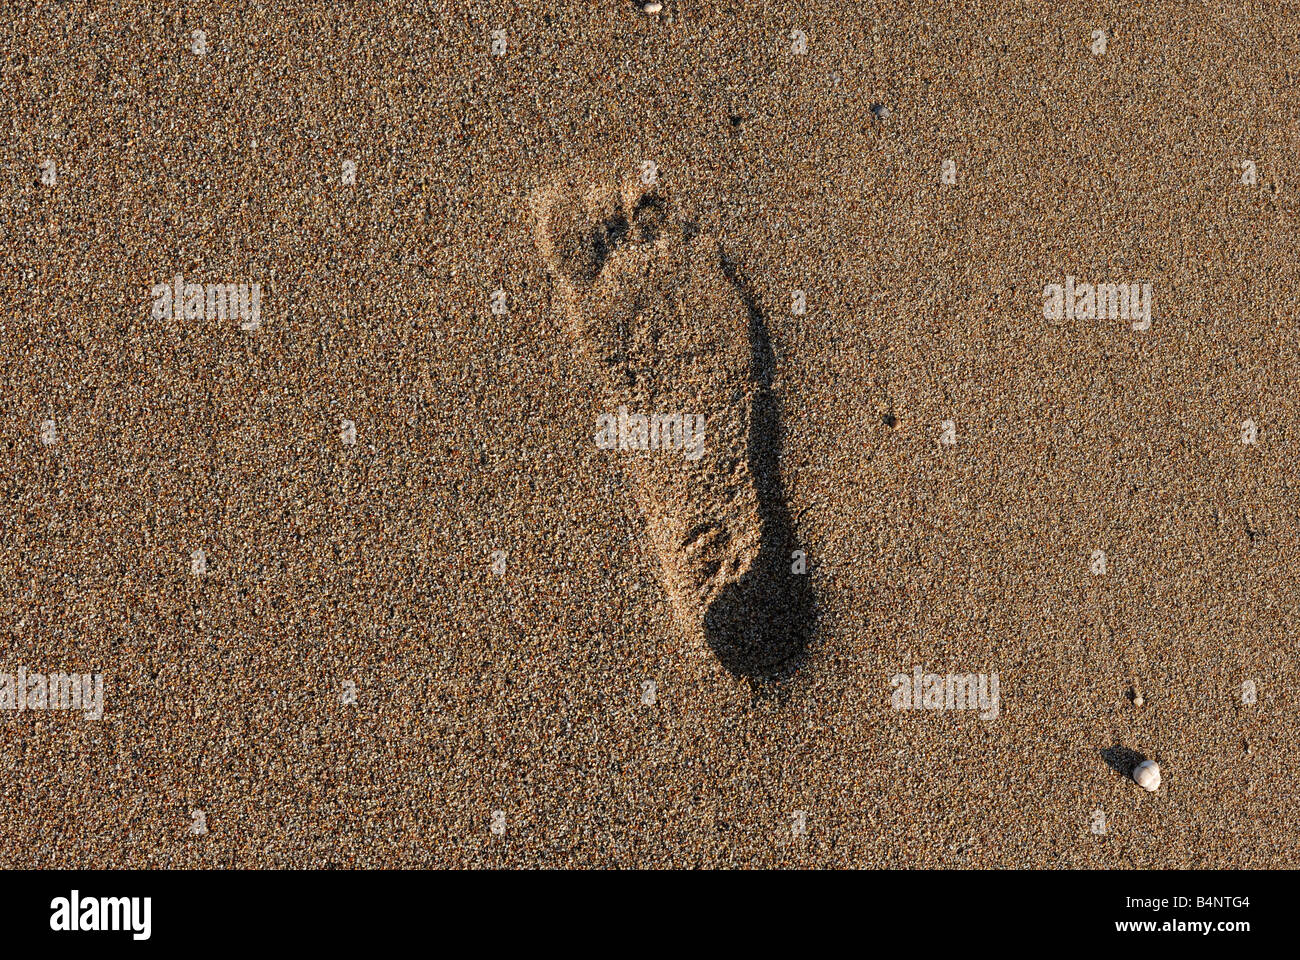 A foot print in the sandy beach Stock Photo